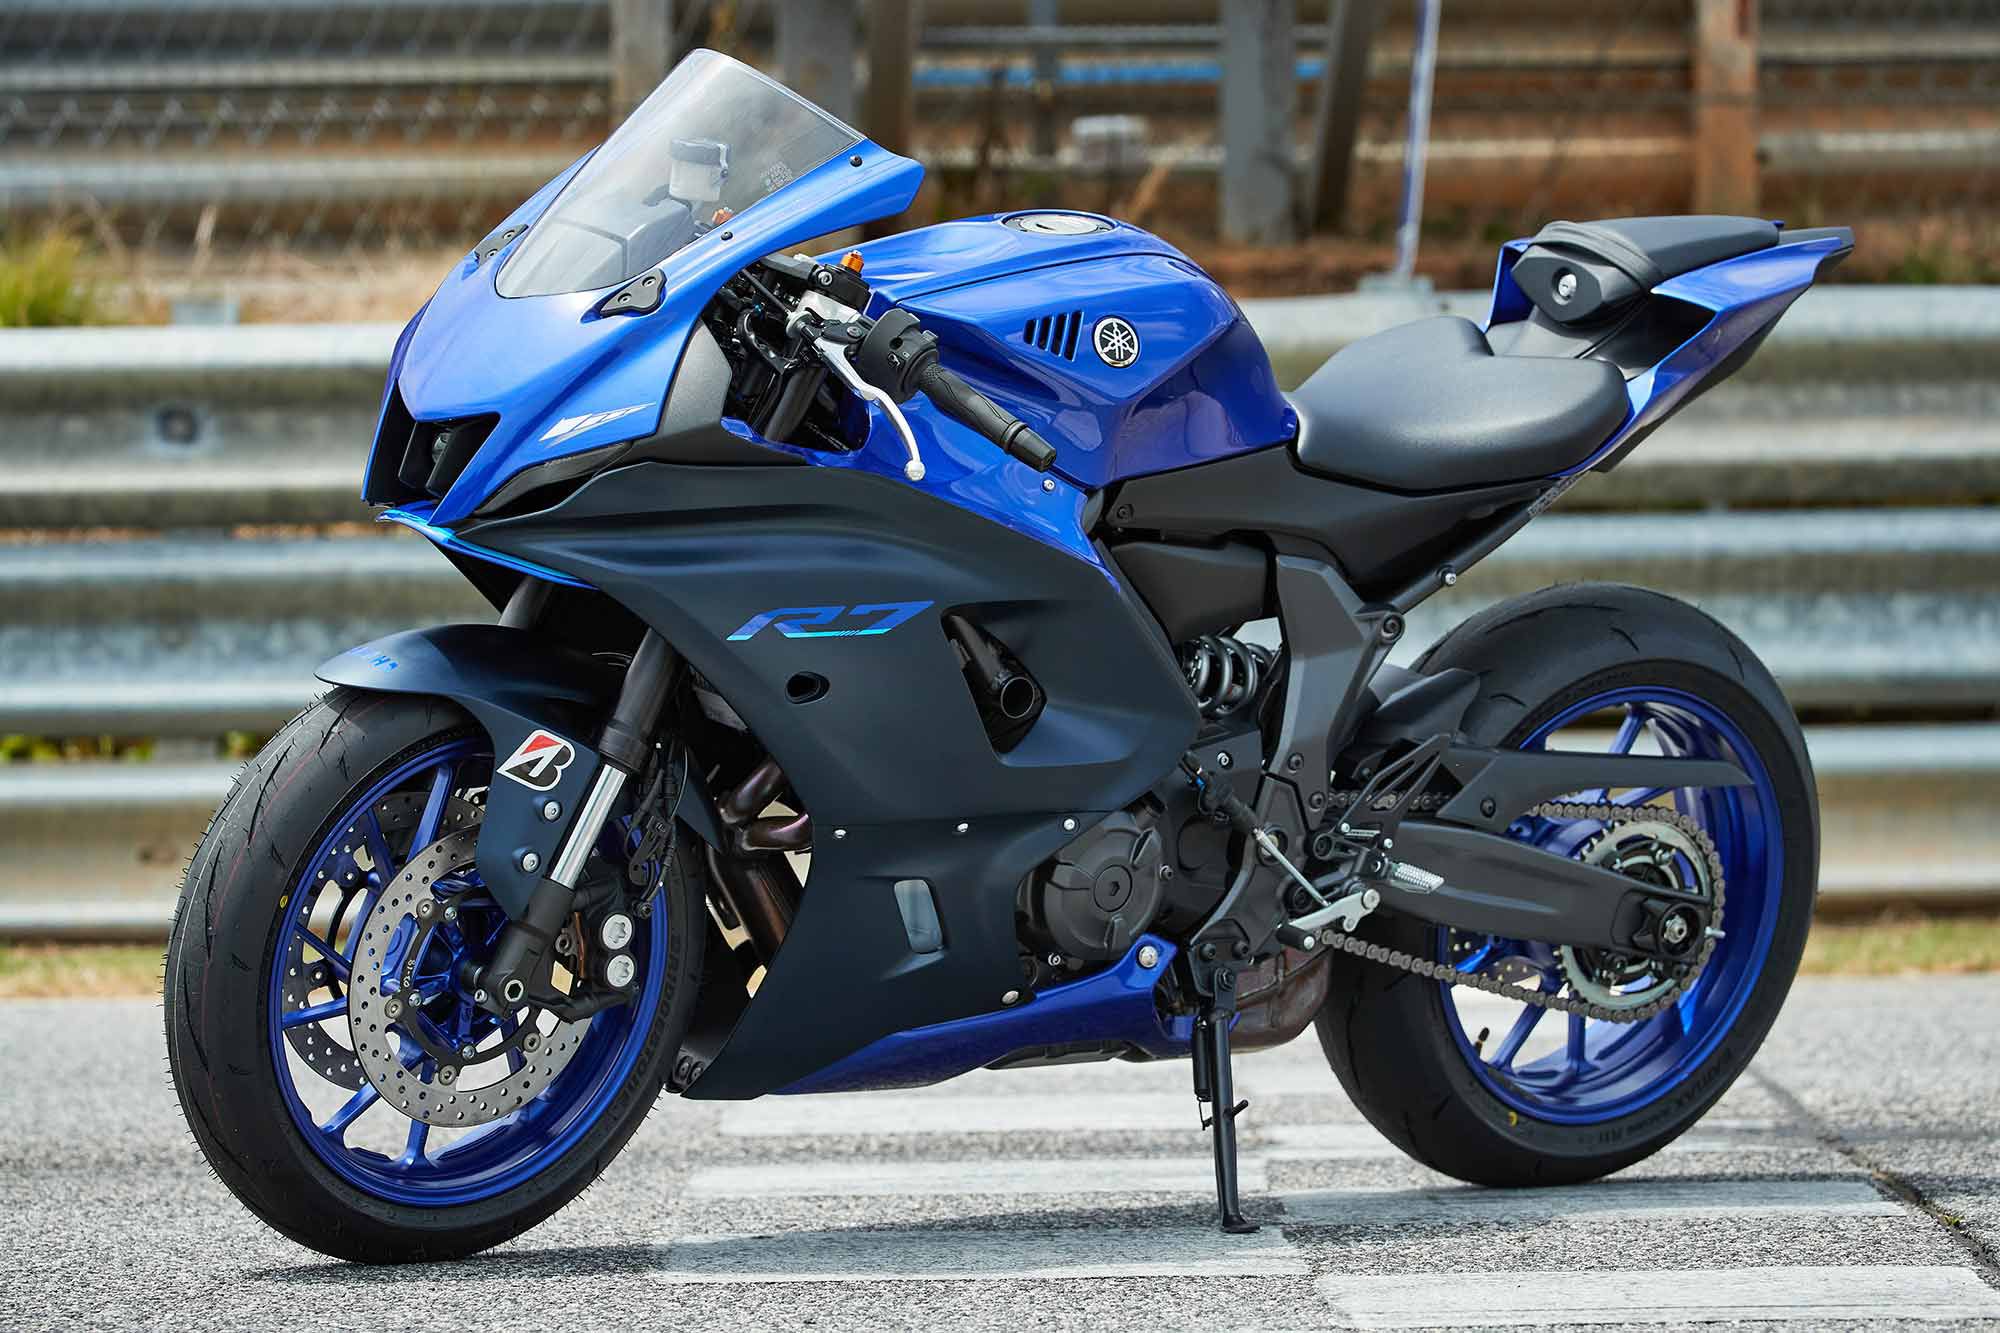 Riders seeking an affordable twin-cylinder sportbike with big bike looks will do well with the 2022 YZF-R7.